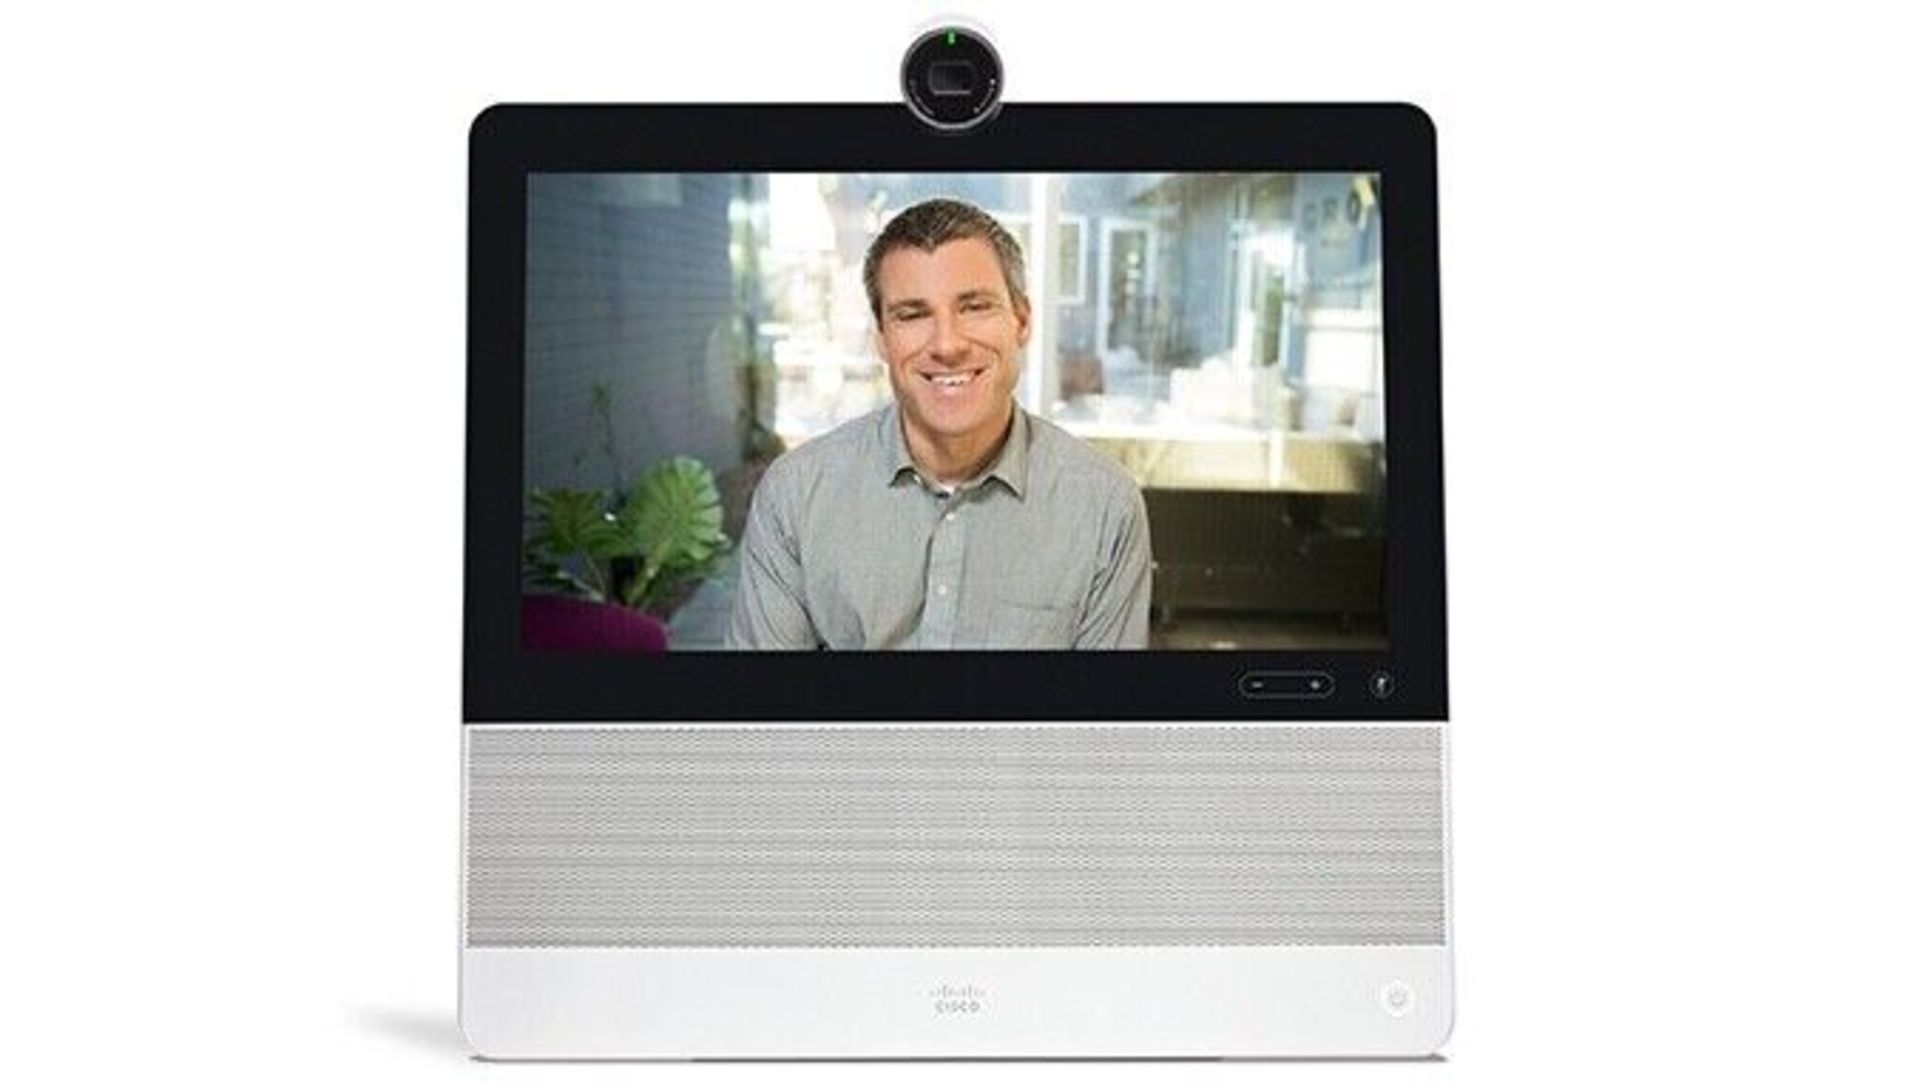 NEW CISCO CP-DX70-W-K9 All-In-One Touch Screen Video Conference Screen Phone Kit